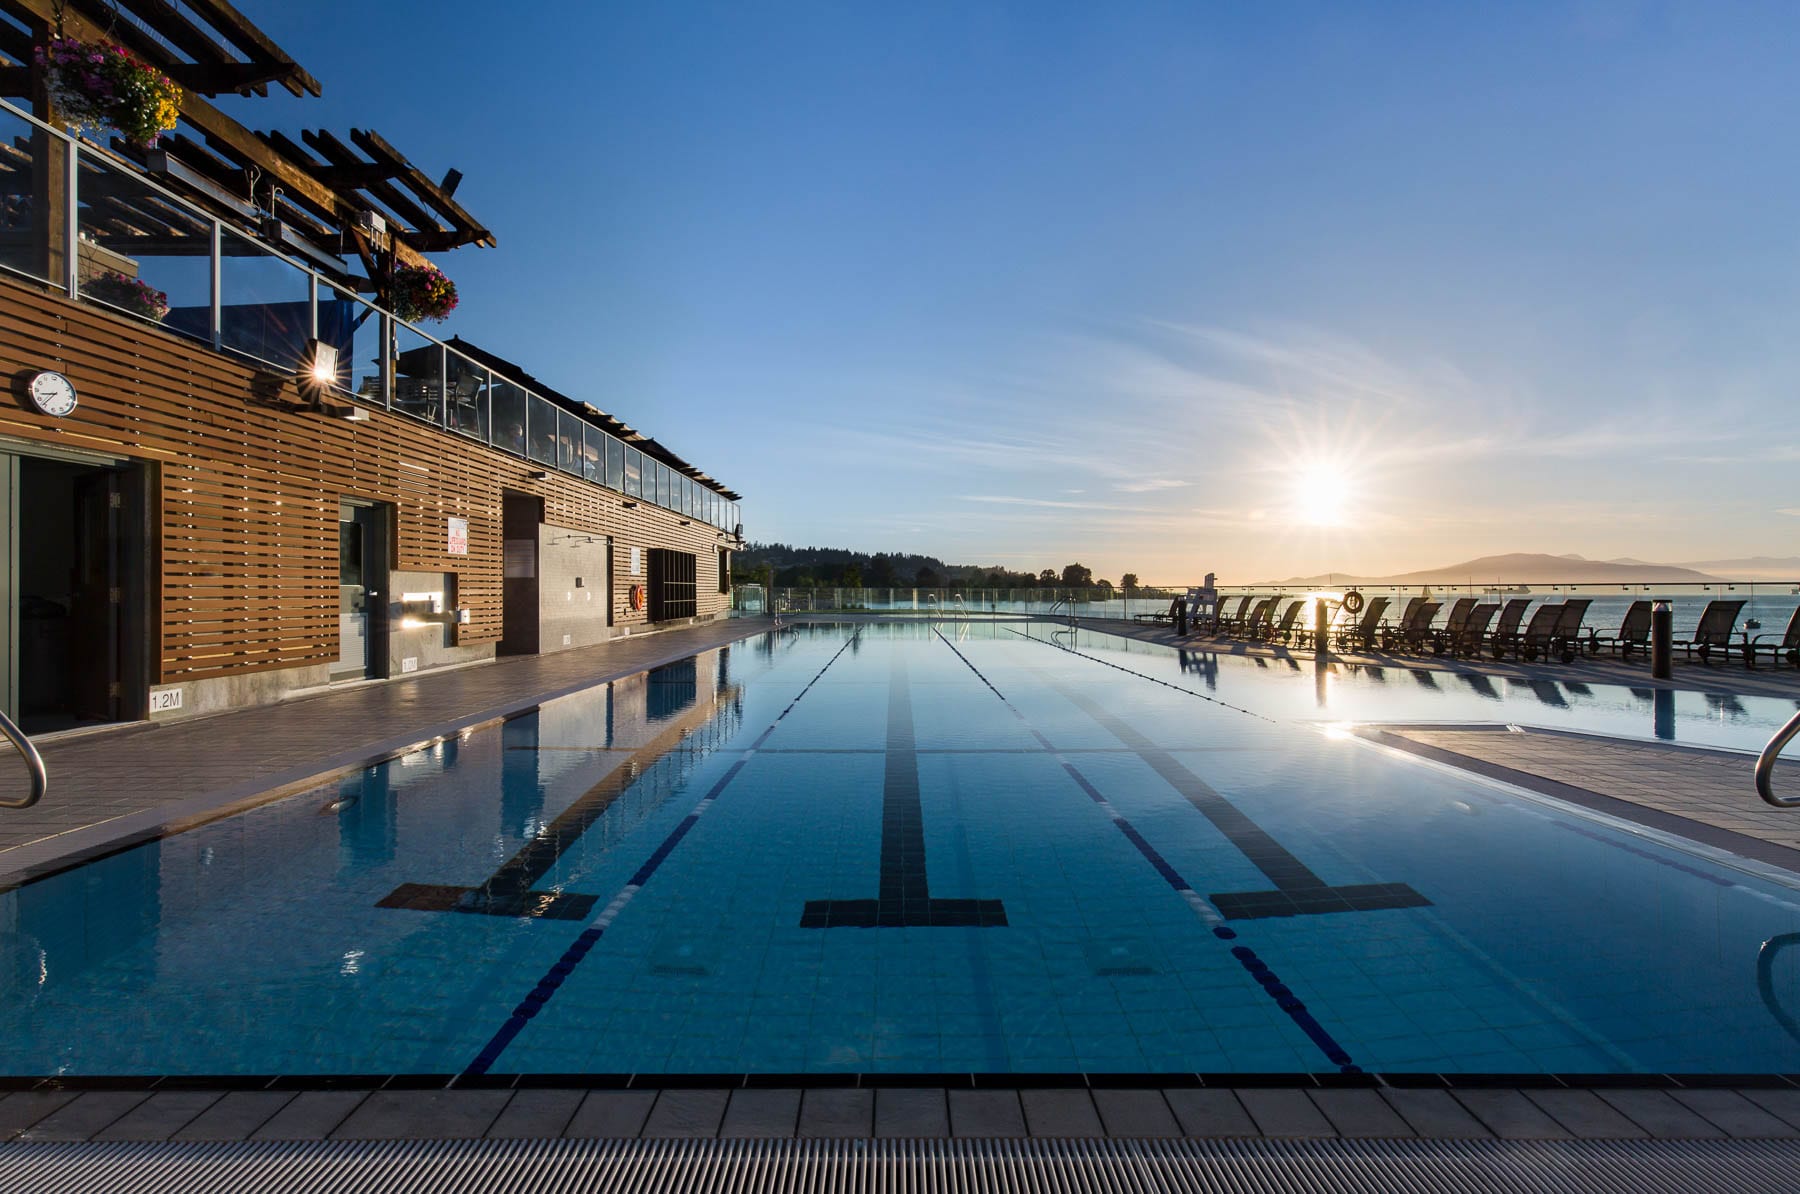 Renovated point grey outdoor swimming pool at beautiful sunrise